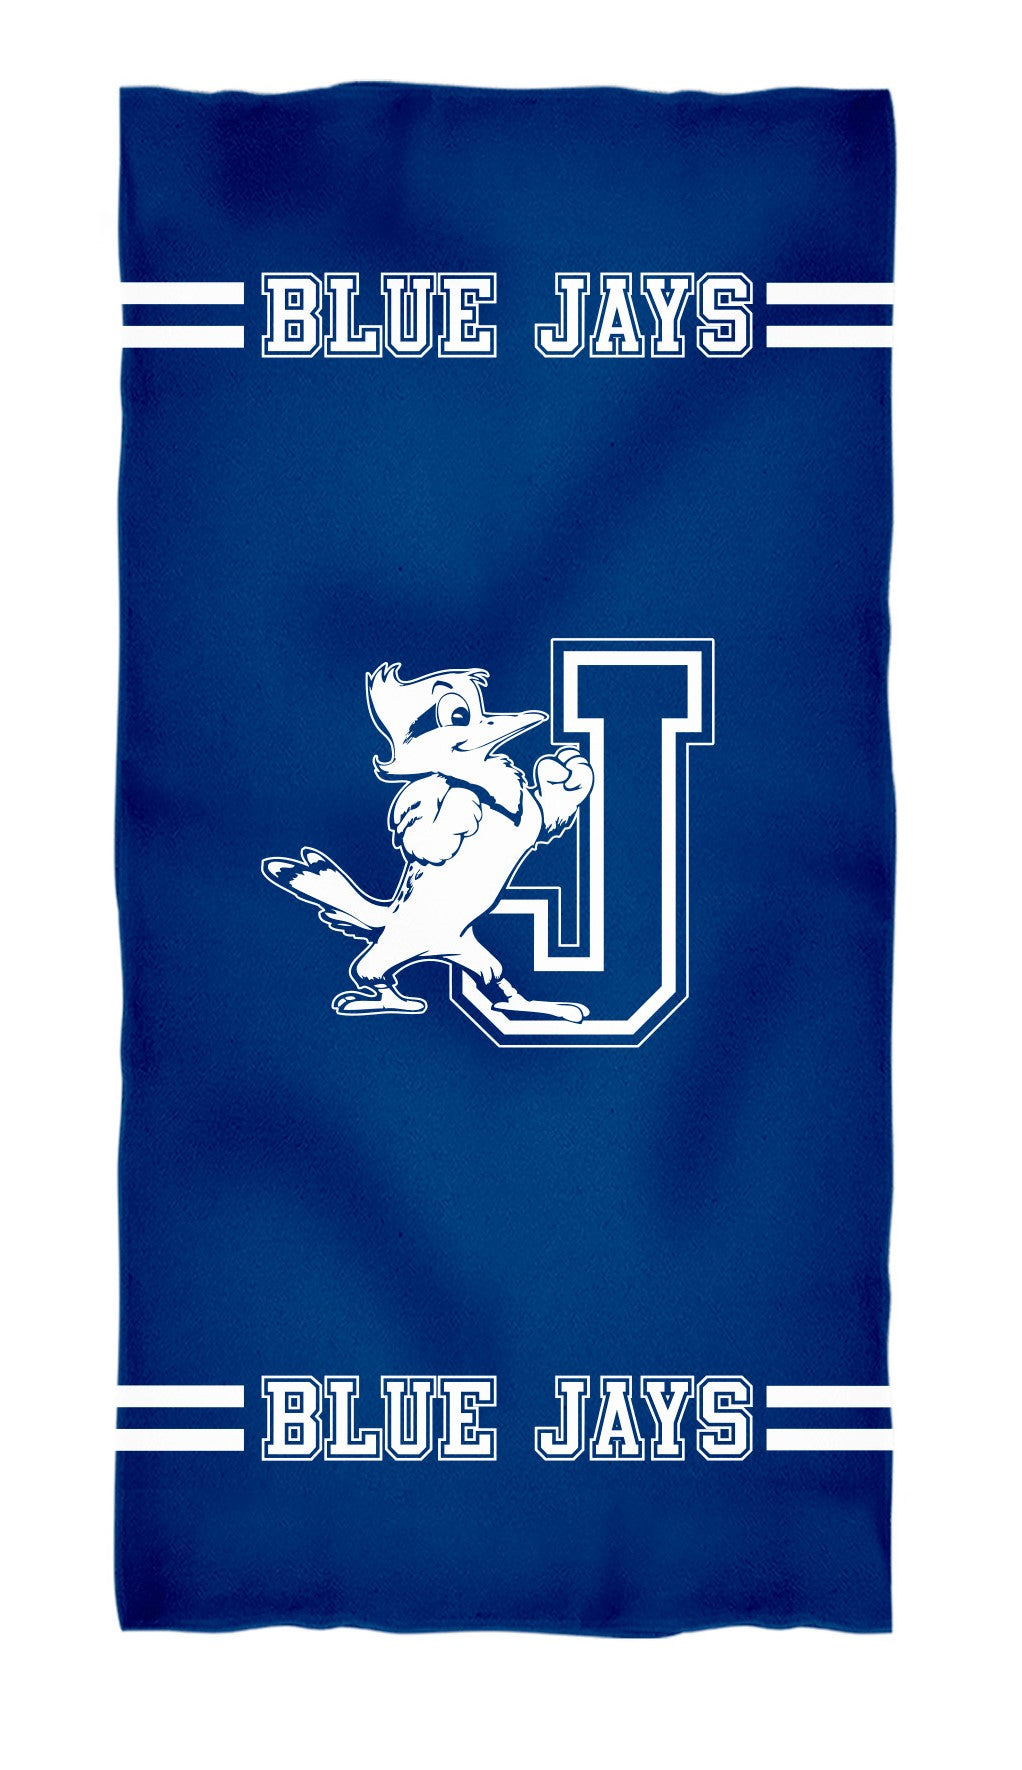 Vive La Fete.  100% Cotton. Measures 28" x 58".    Enjoy the pool, the beach, or bath showing your Blue Jay spirit in comfort and style.  It's soft, light weight and super-absorbent fast drying.  Royal Blue towel with white stripes.  J/Jayson logo with Blue Jays logo on both ends.